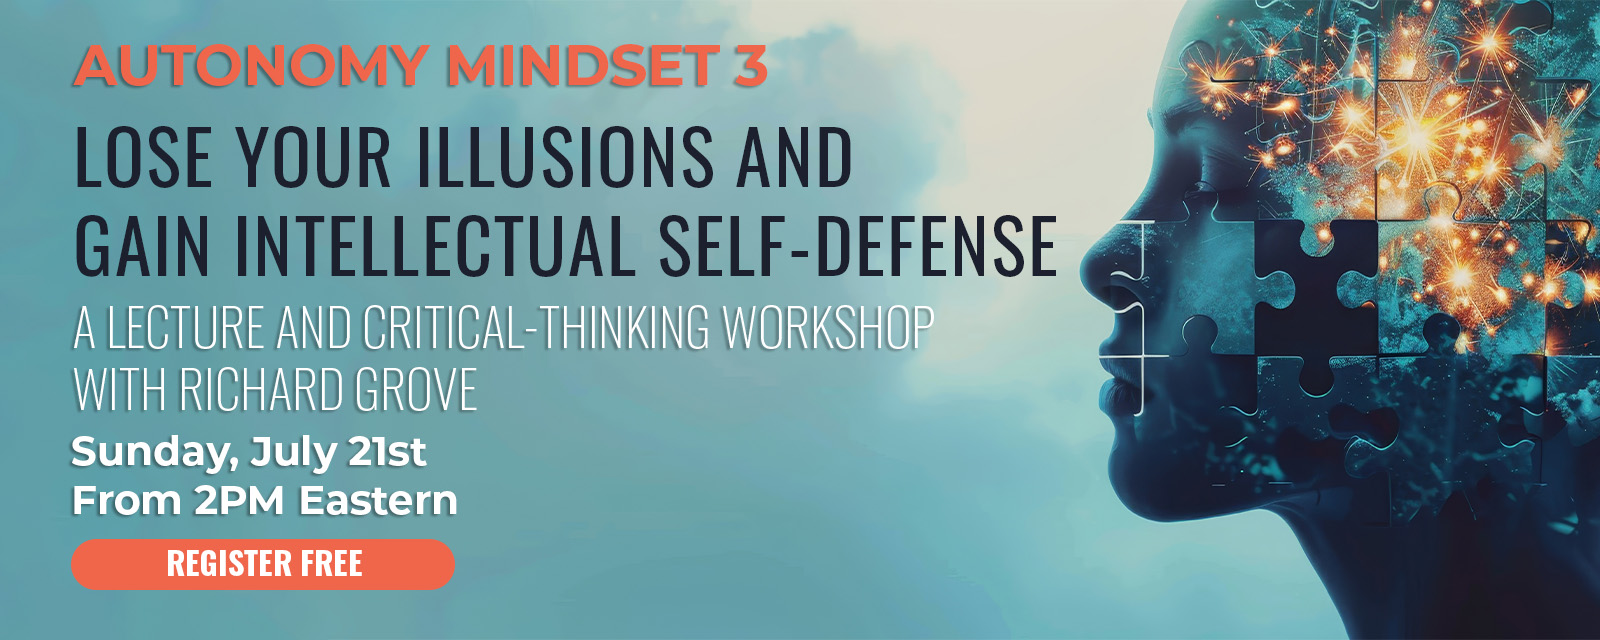 AUTONOMY Mindset 3 - Lose Your Illusions and Gain Intellectual Self-Defense